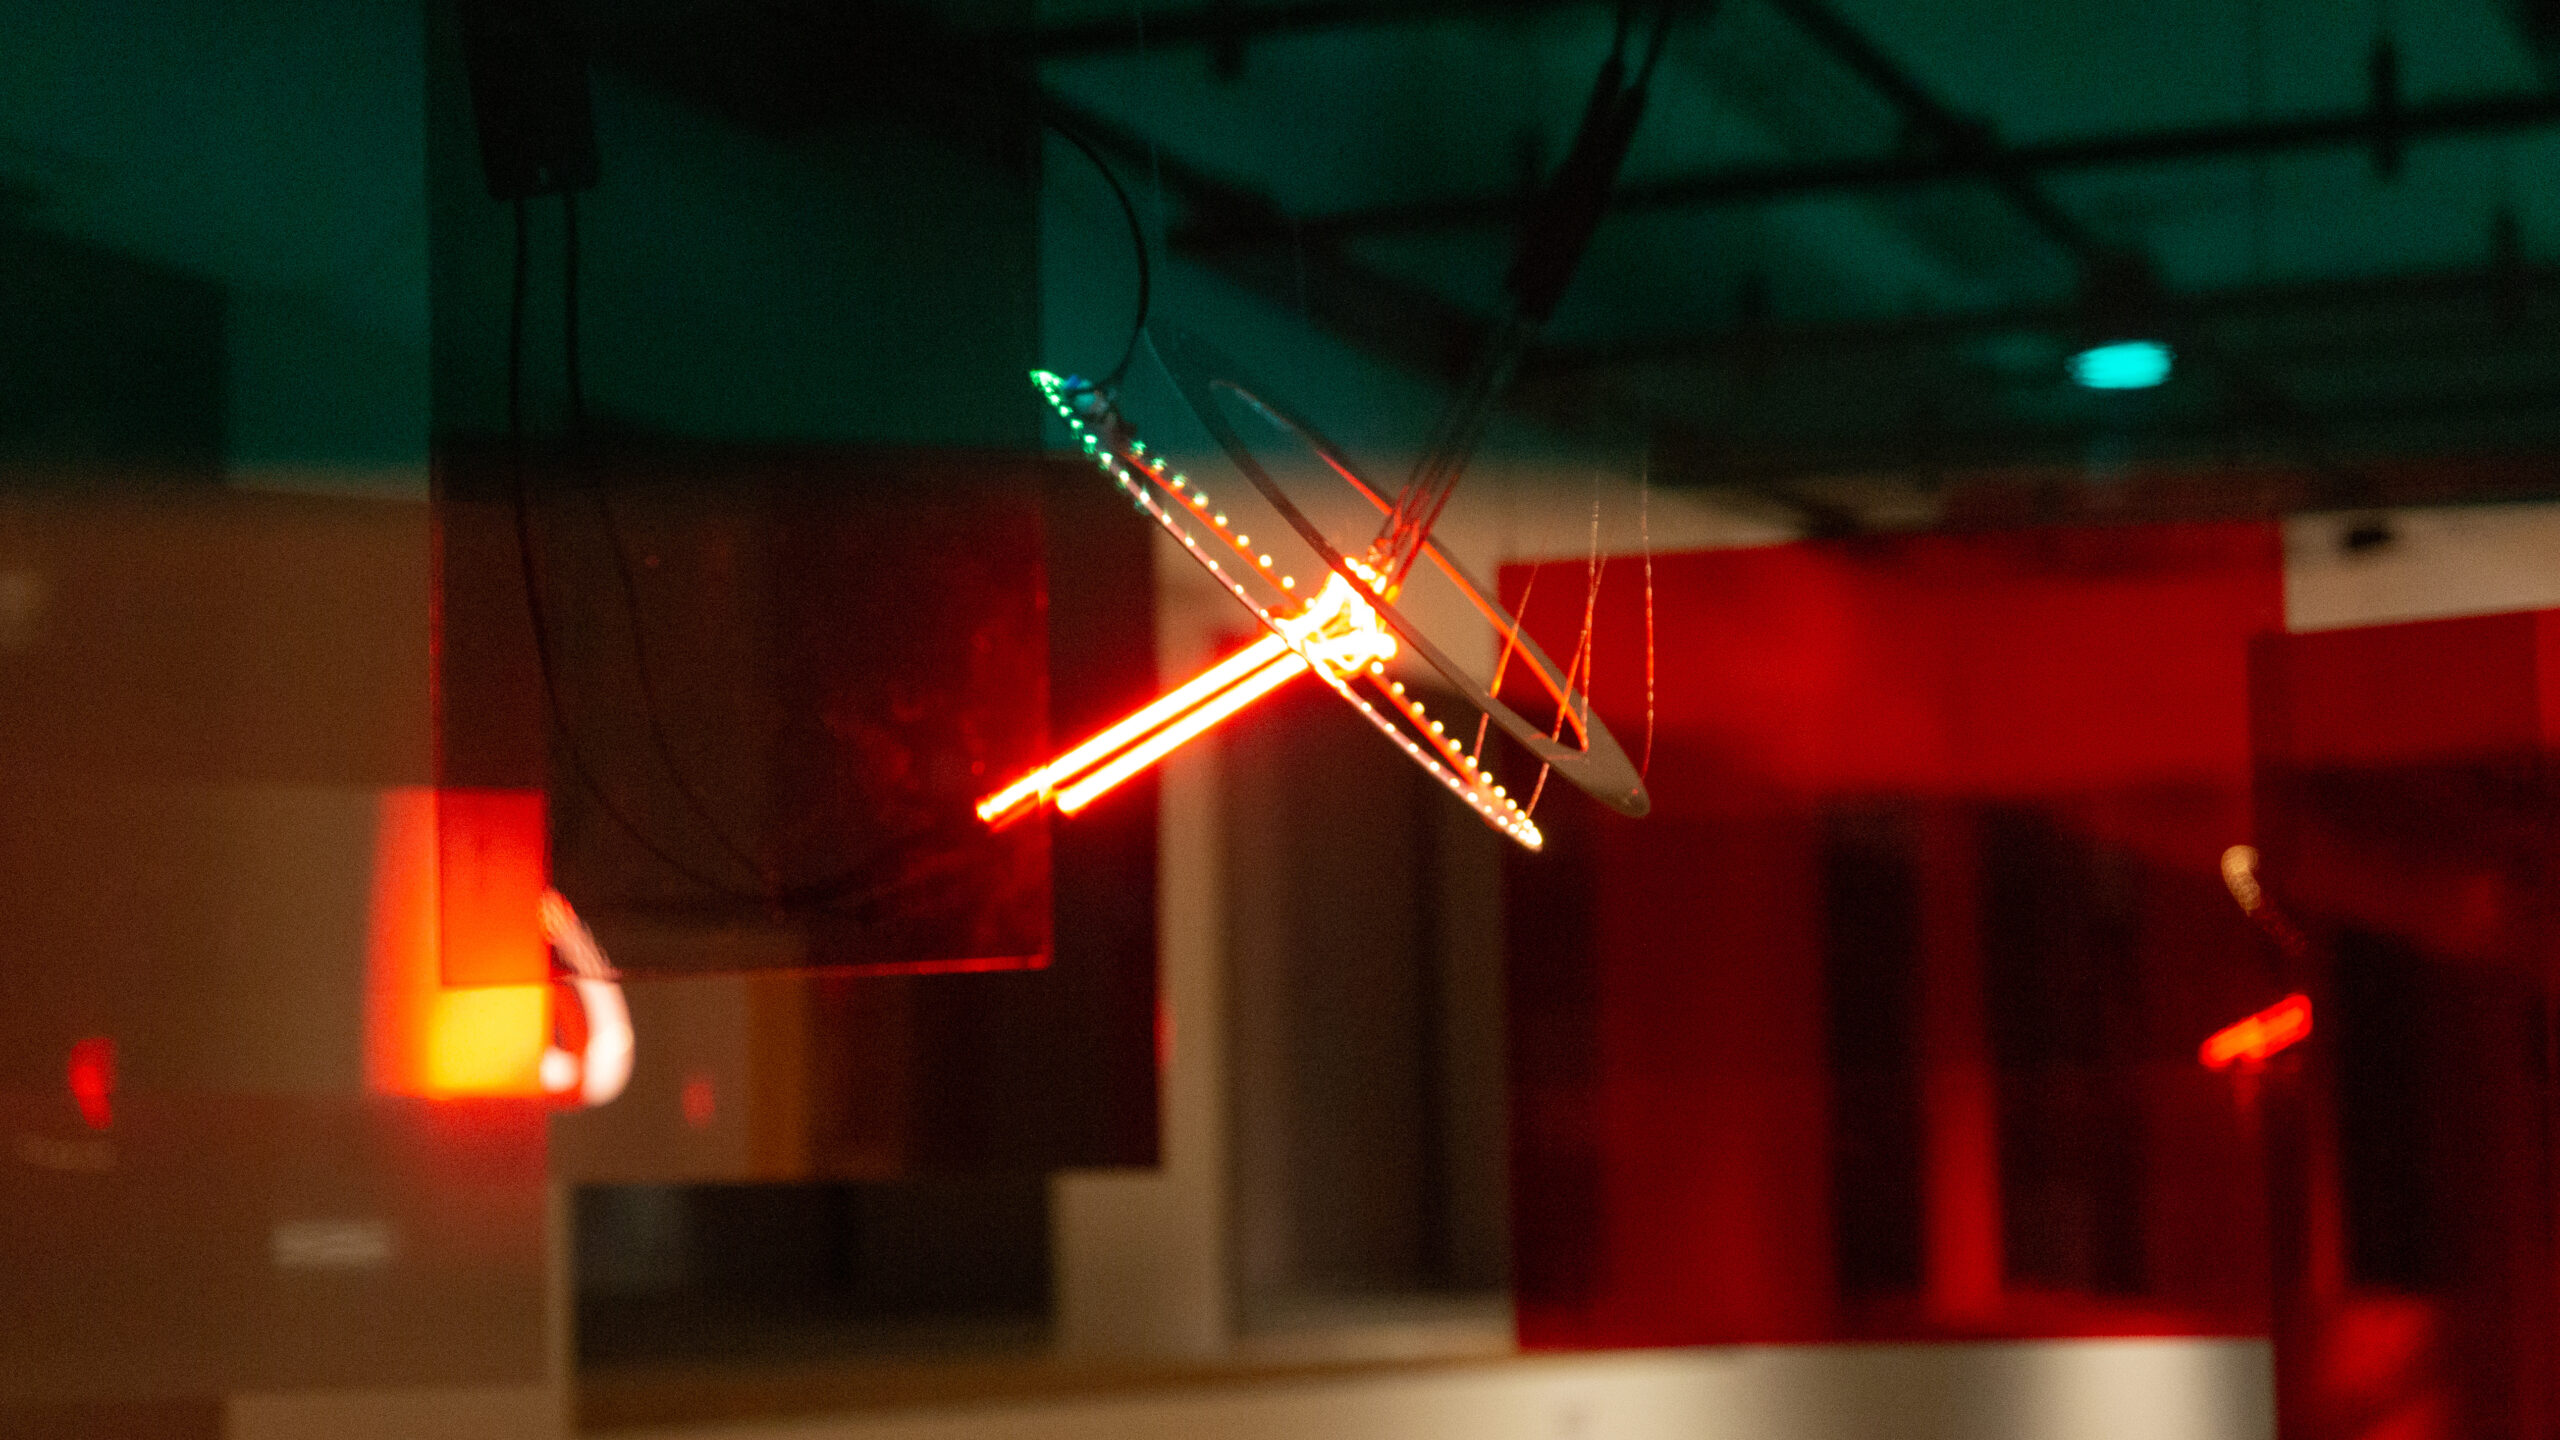 A suspended light sculpture with two neon pieces and two printed circuit boards, featuring gray translucent acrylic panels that reflect the light sculpture in the background.